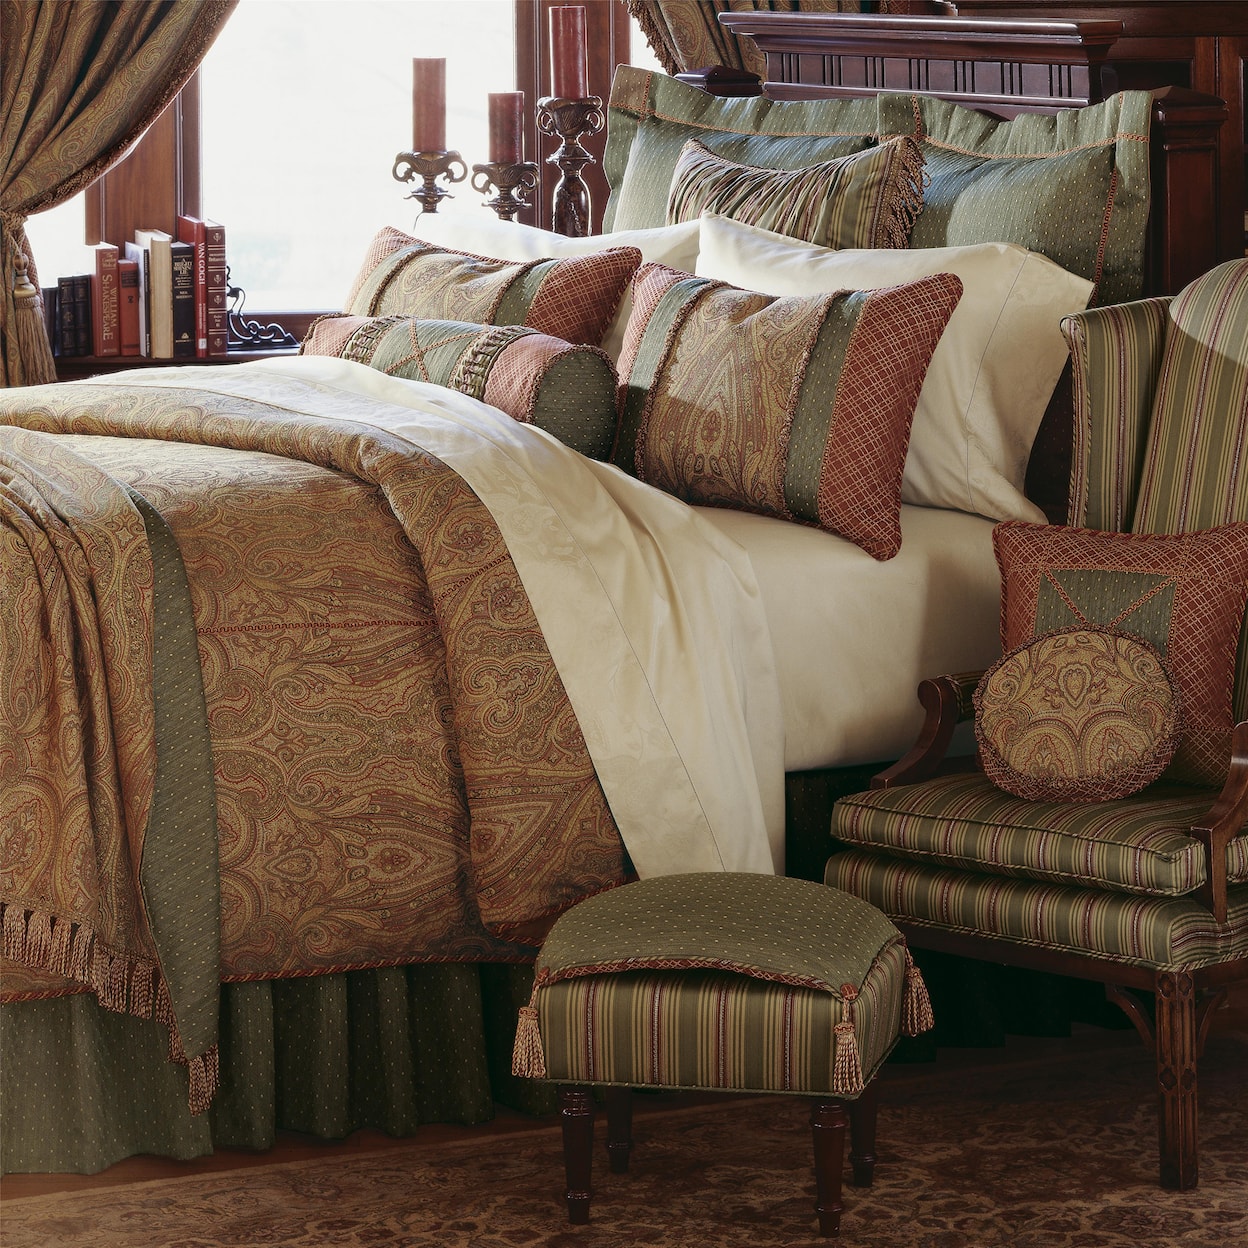 Eastern Accents Glenwood Queen Button-Tufted Comforter